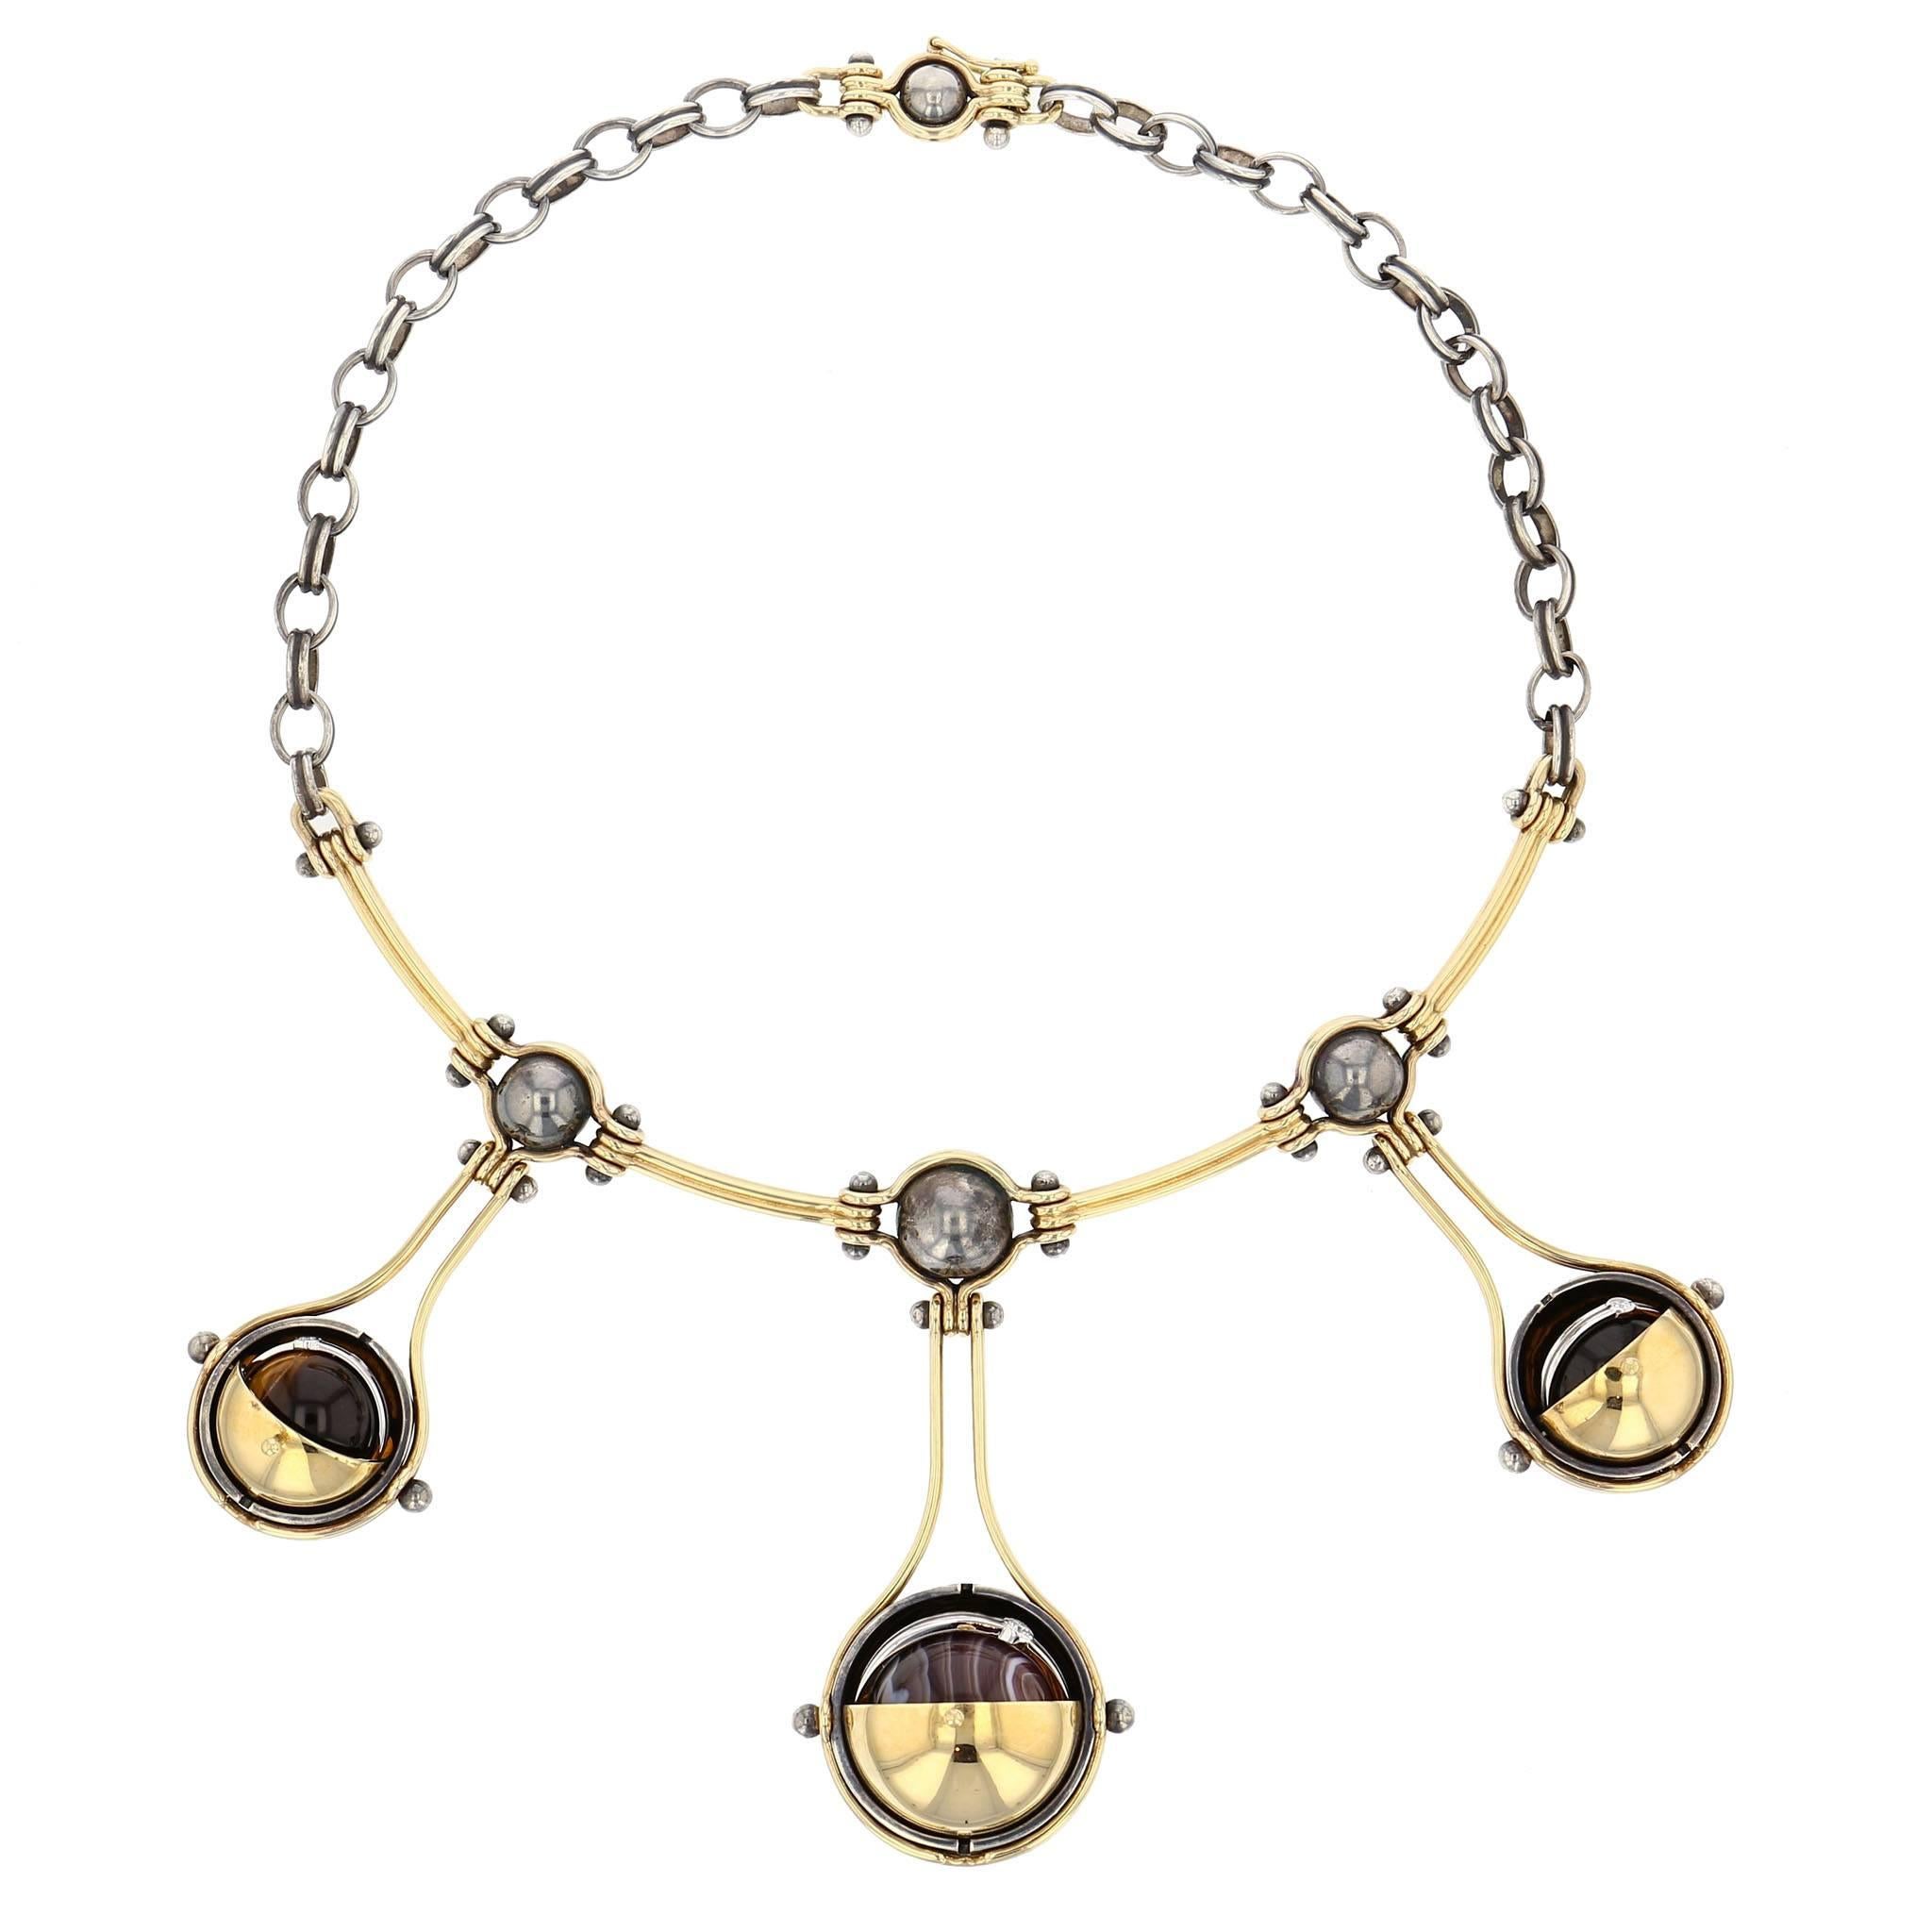 Elie Top 3 Drops Necklace Gold and Diamonds

Choker comprising a yellow gold articulated torc and a patinated silver chain. The three drops are made of two yellow gold threads around a patinated silver globe supporting a mobile structure. This in